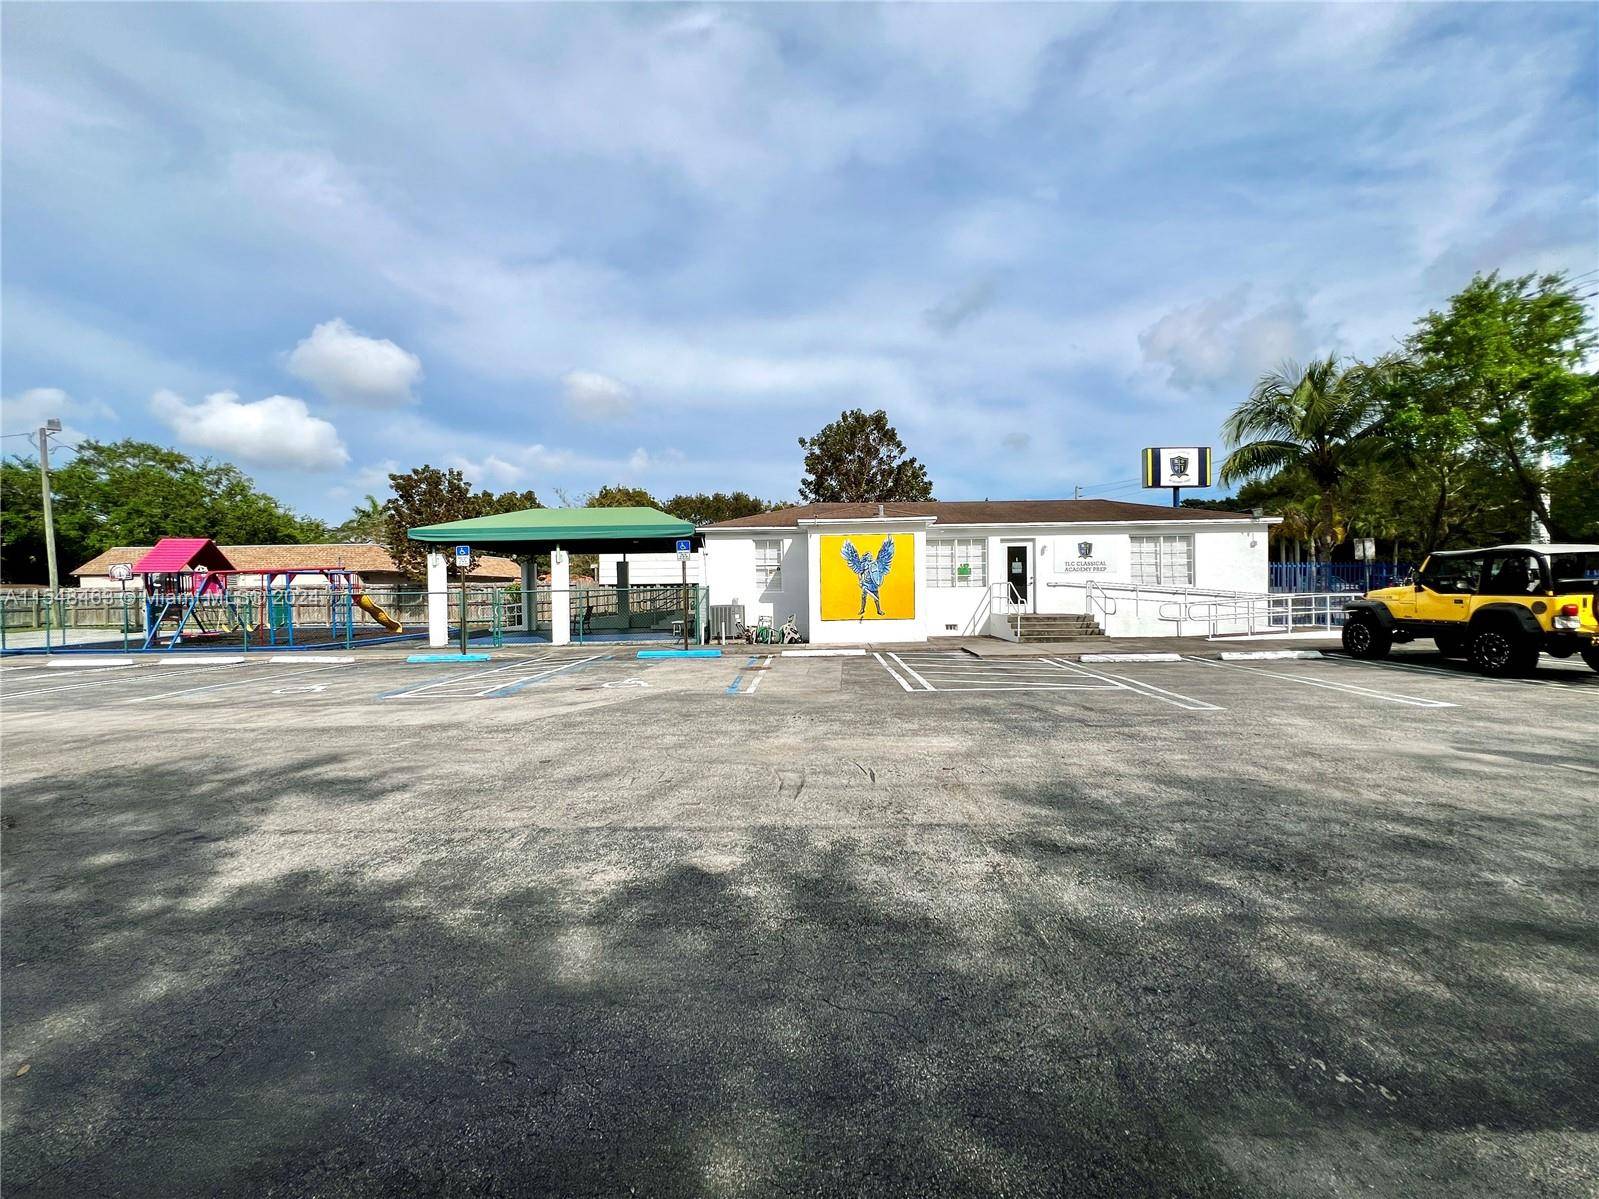 Commercial Property just West of Red Rd, with Coral Gables immediately to the East.